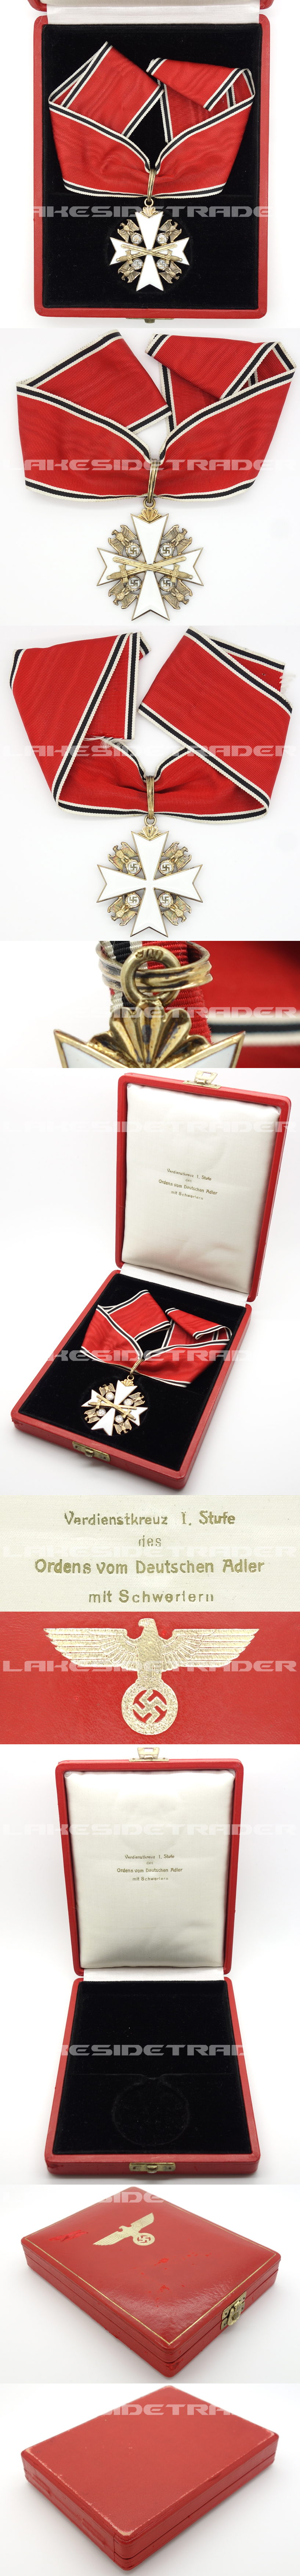 Cased 1st Class Eagle Order Neck Cross with Swords by Godet